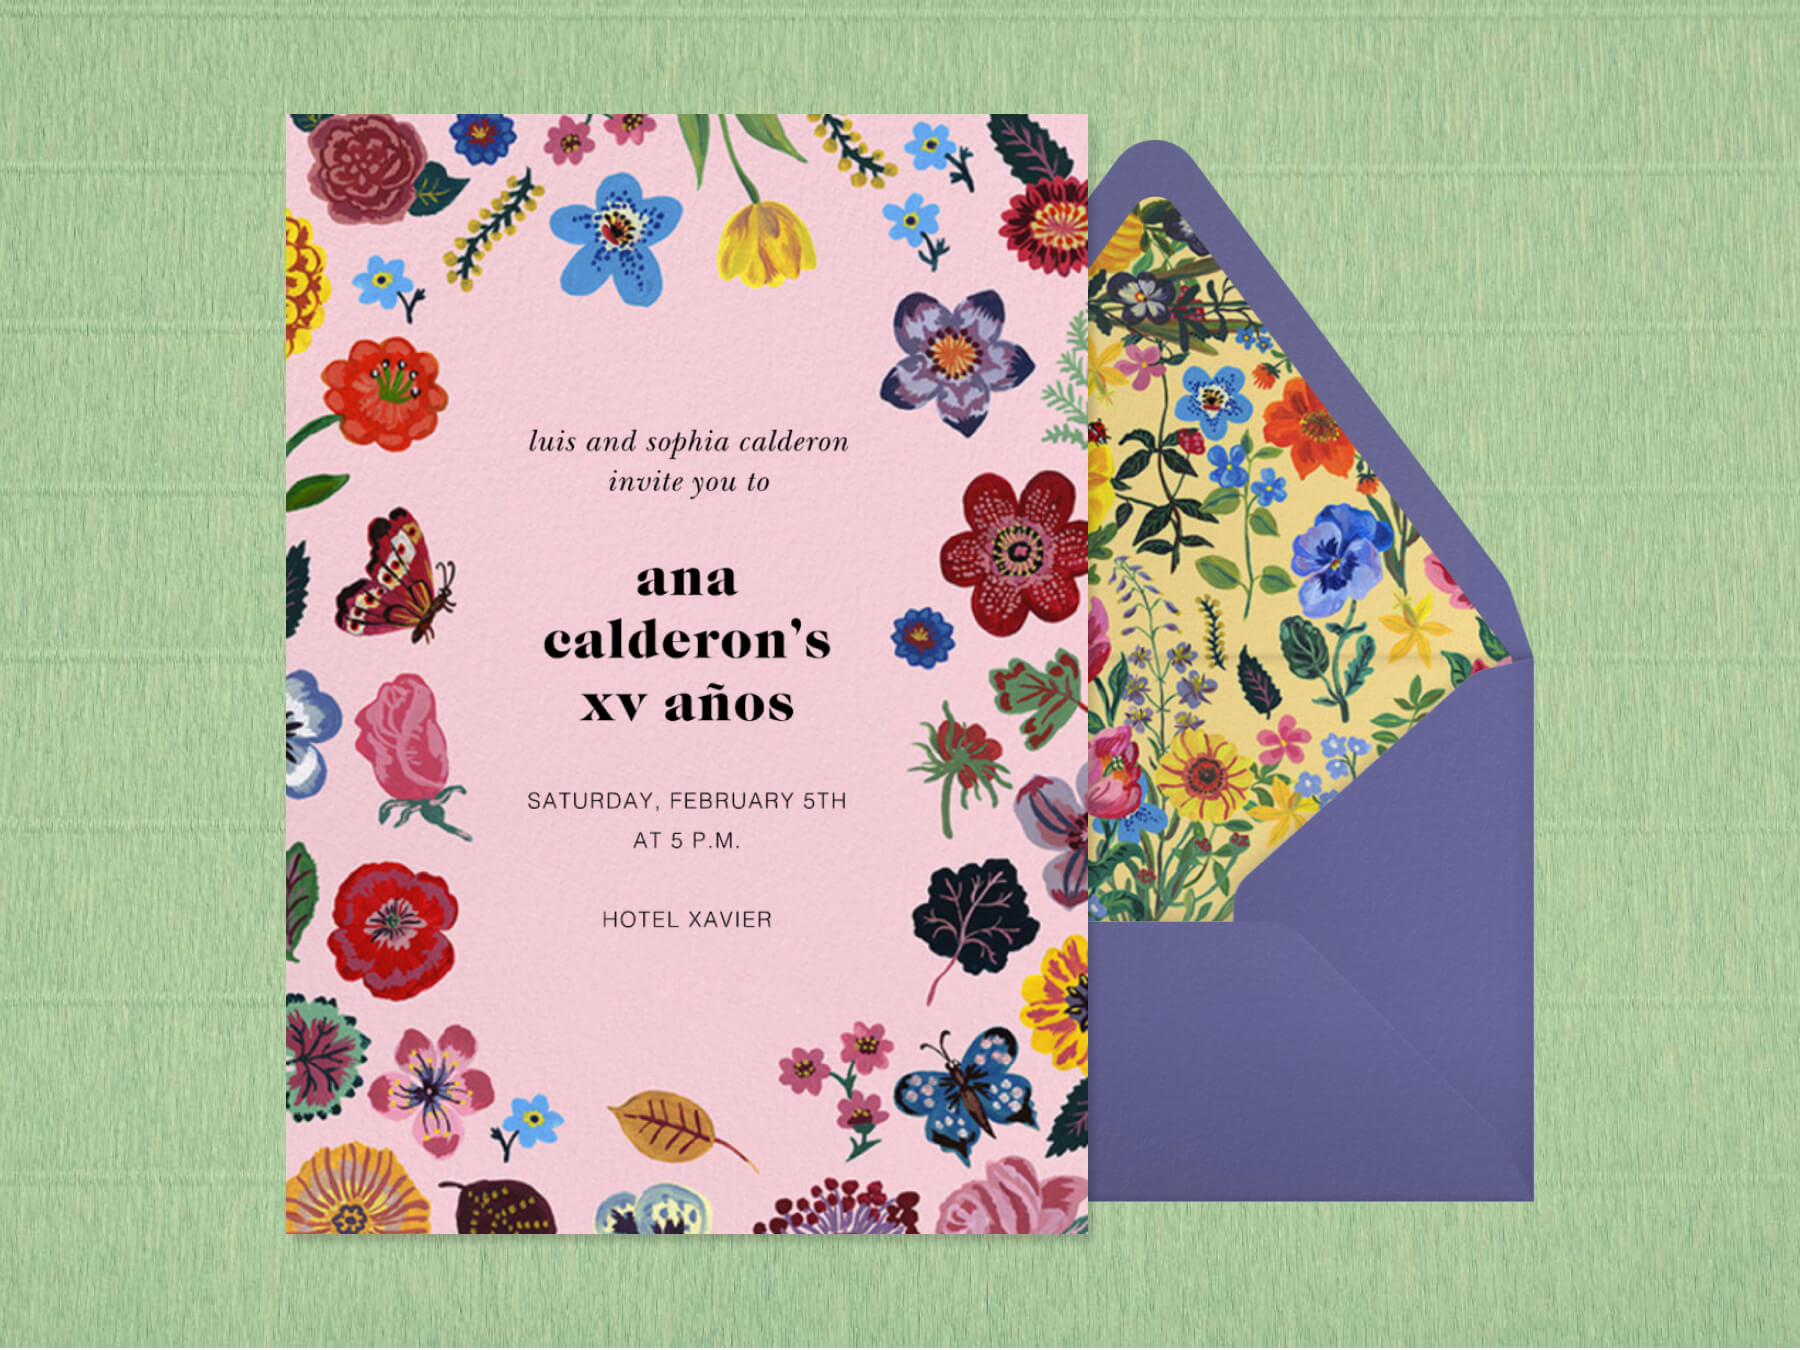 A pink invitation featuring illustrations of butterflies and flowers.